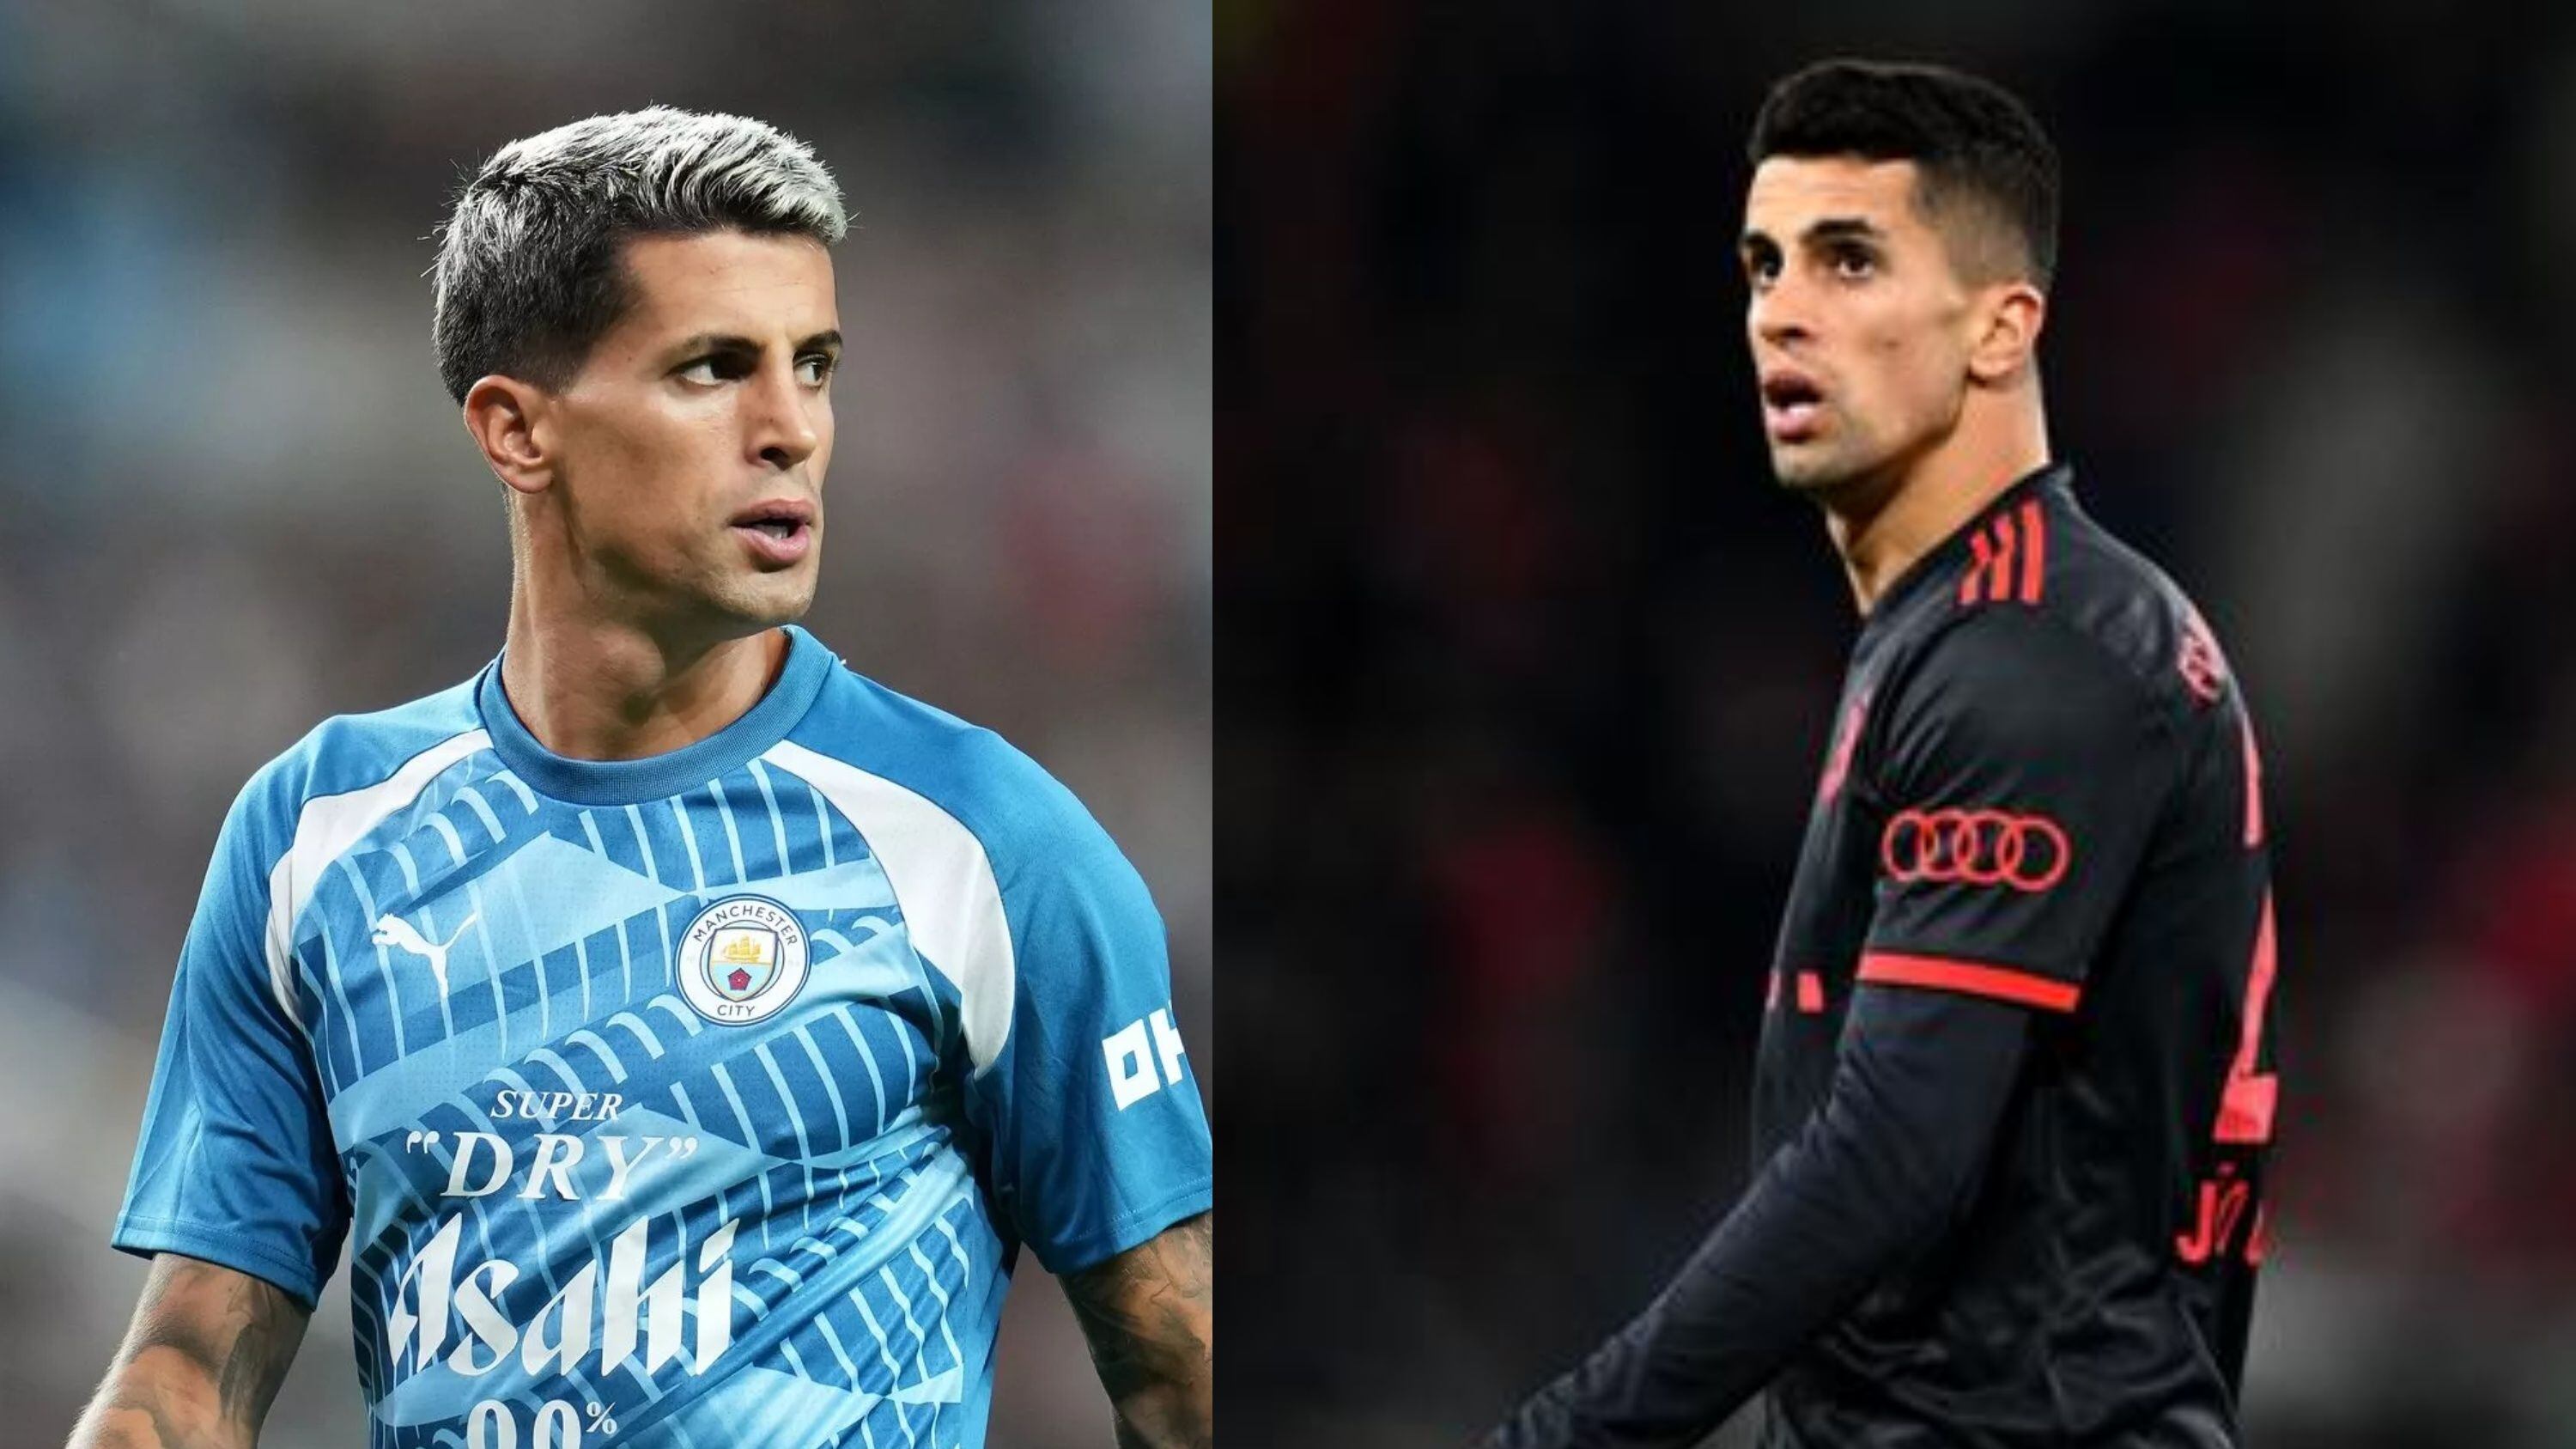 While in Manchester City he earned 10 million, the salary Joao Cancelo will have in Barcelona